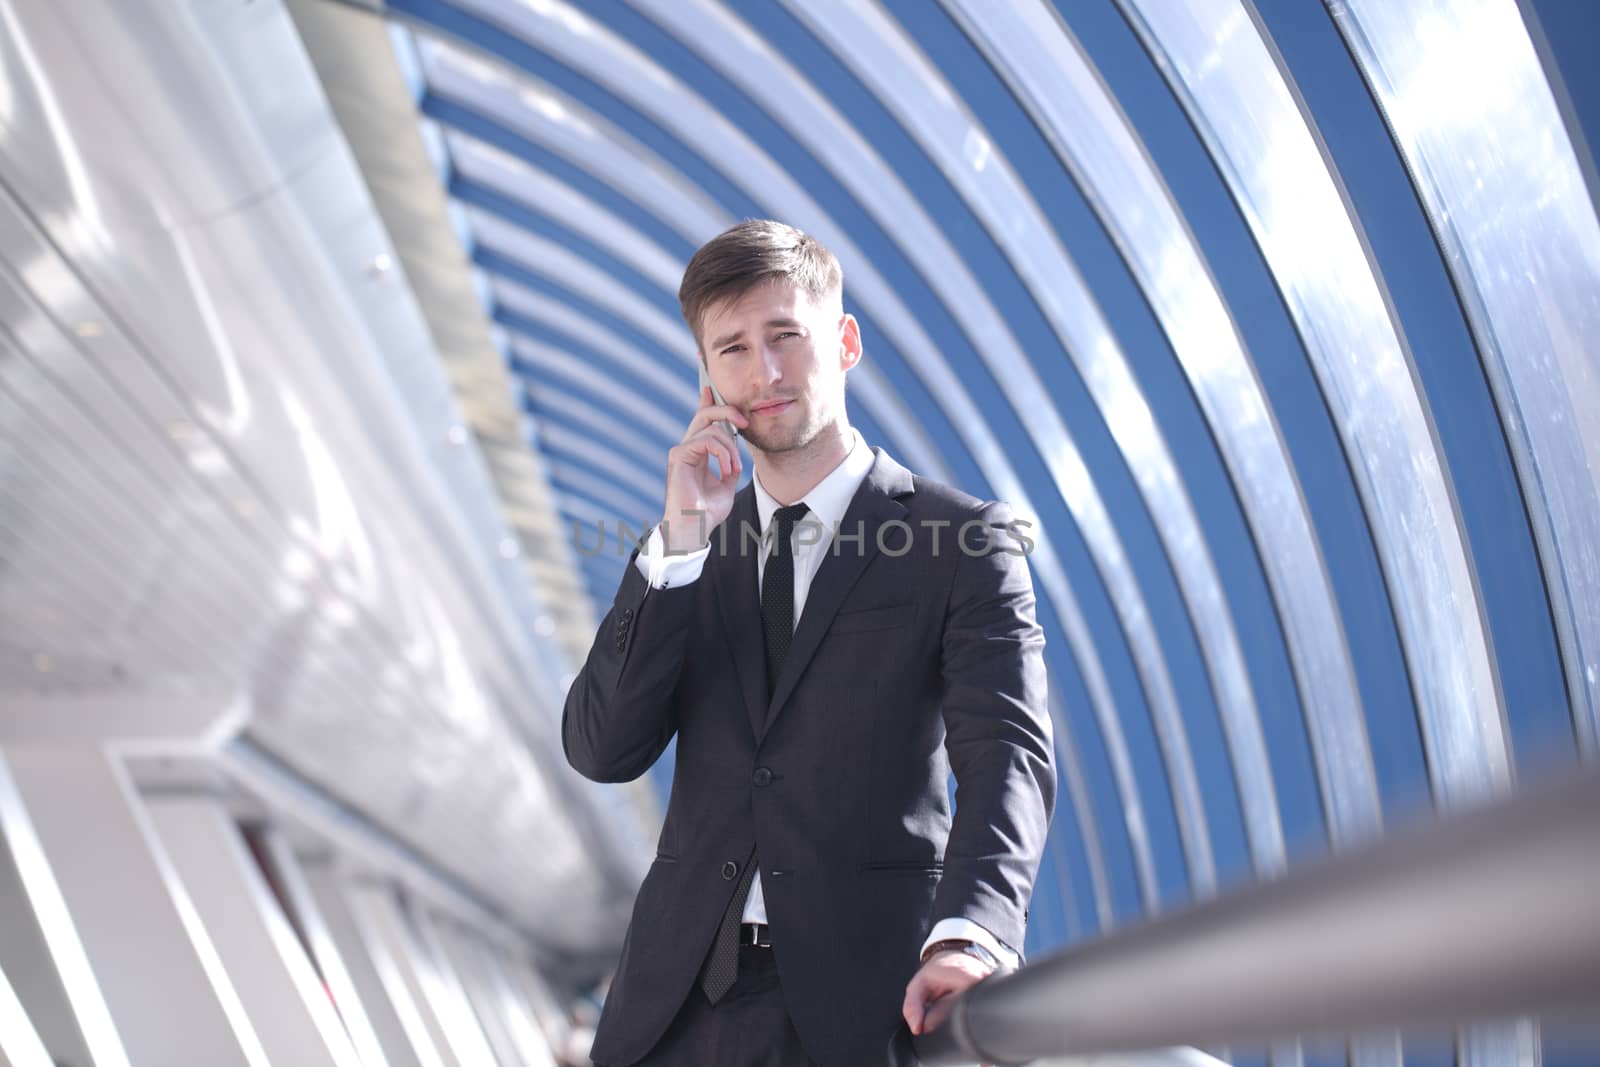 Businessman talking on the phone in modern building